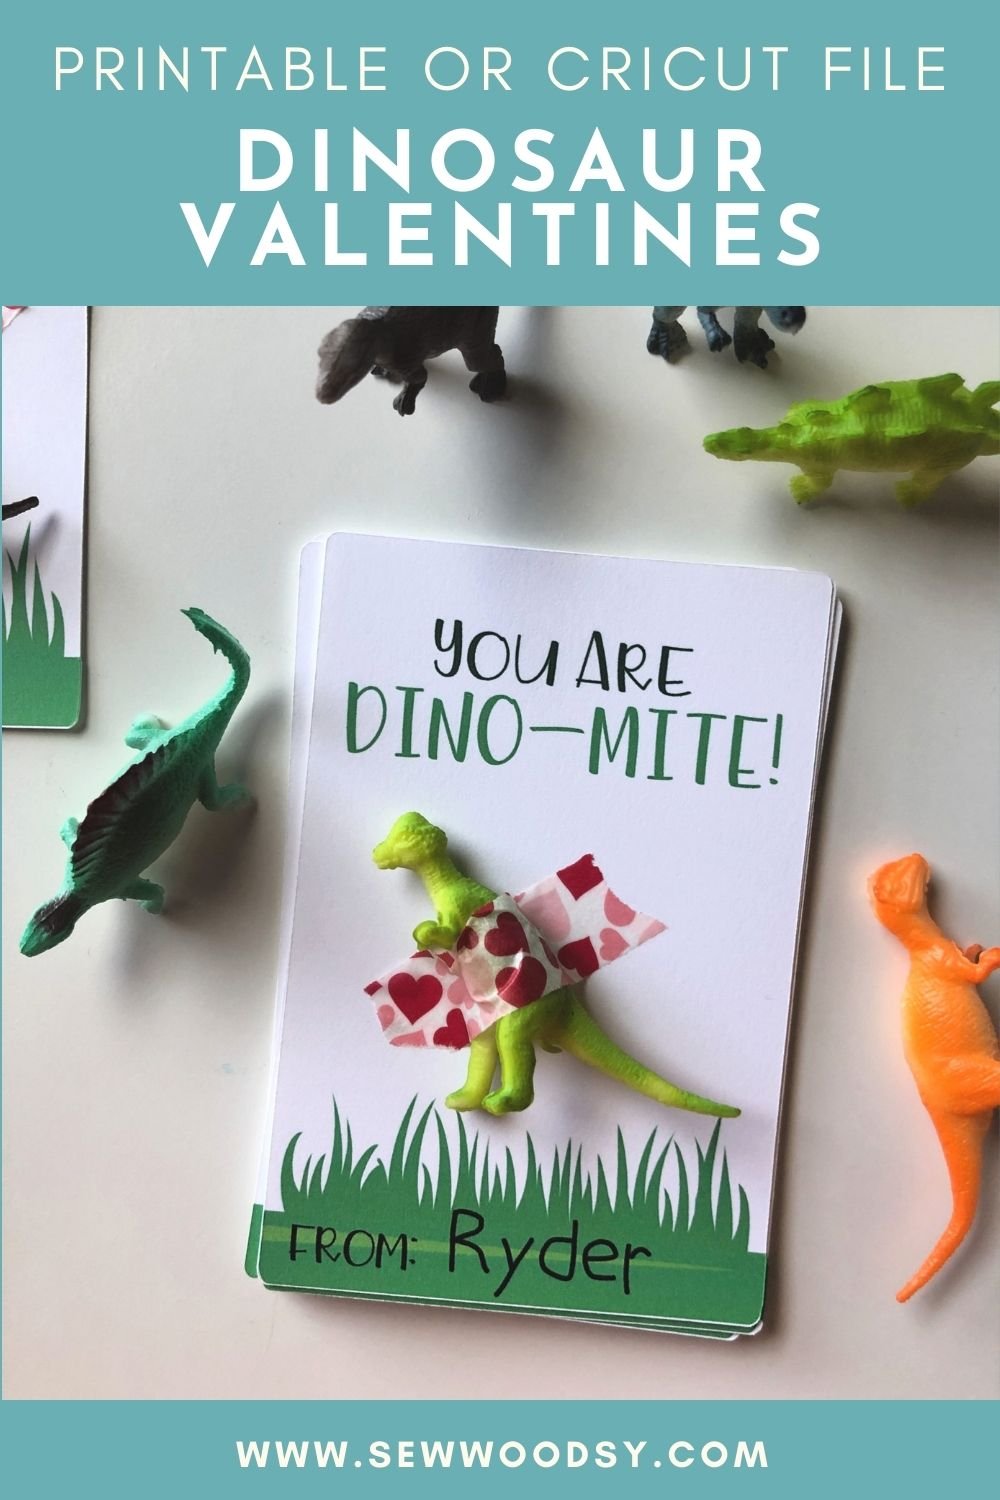 Top view of a pile of valentines with dinosaurs around it and post title text on image for Pinterest.